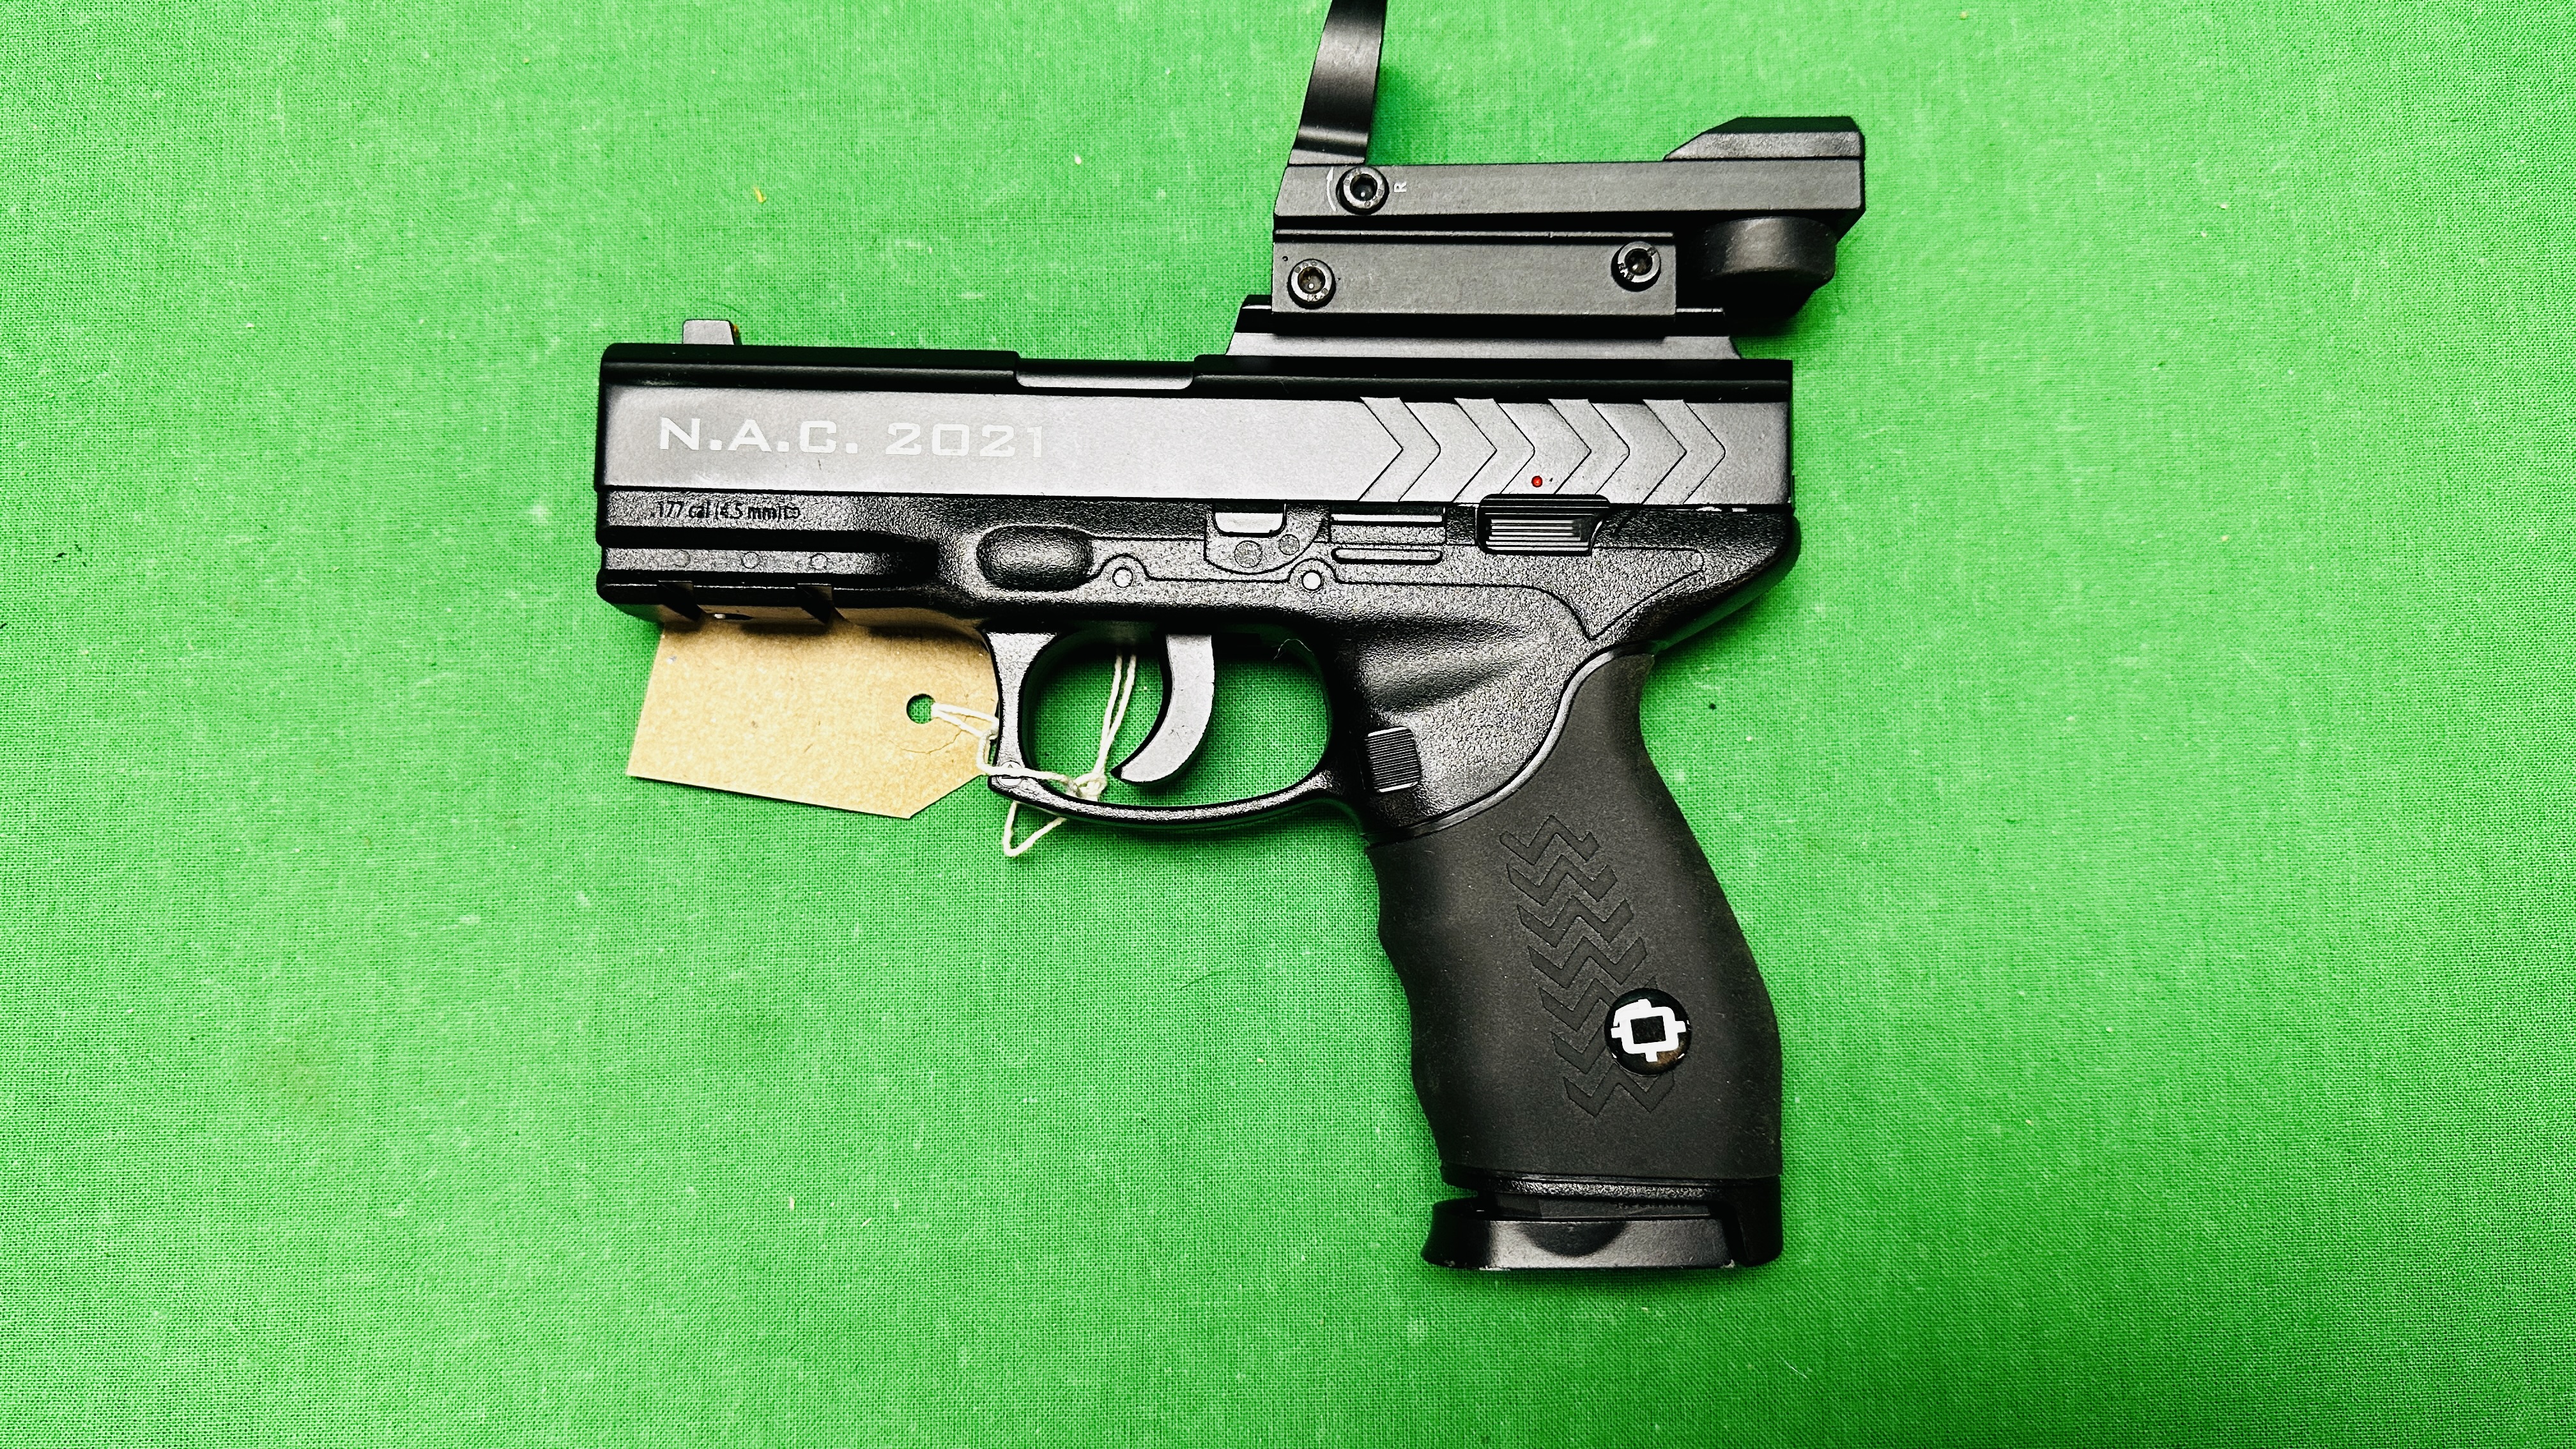 NORICA NAC 2021 CO2 MULTI SHOT AIR PISTOL COMPLETE WITH SIGHT - (ALL GUNS TO BE INSPECTED AND - Image 5 of 9